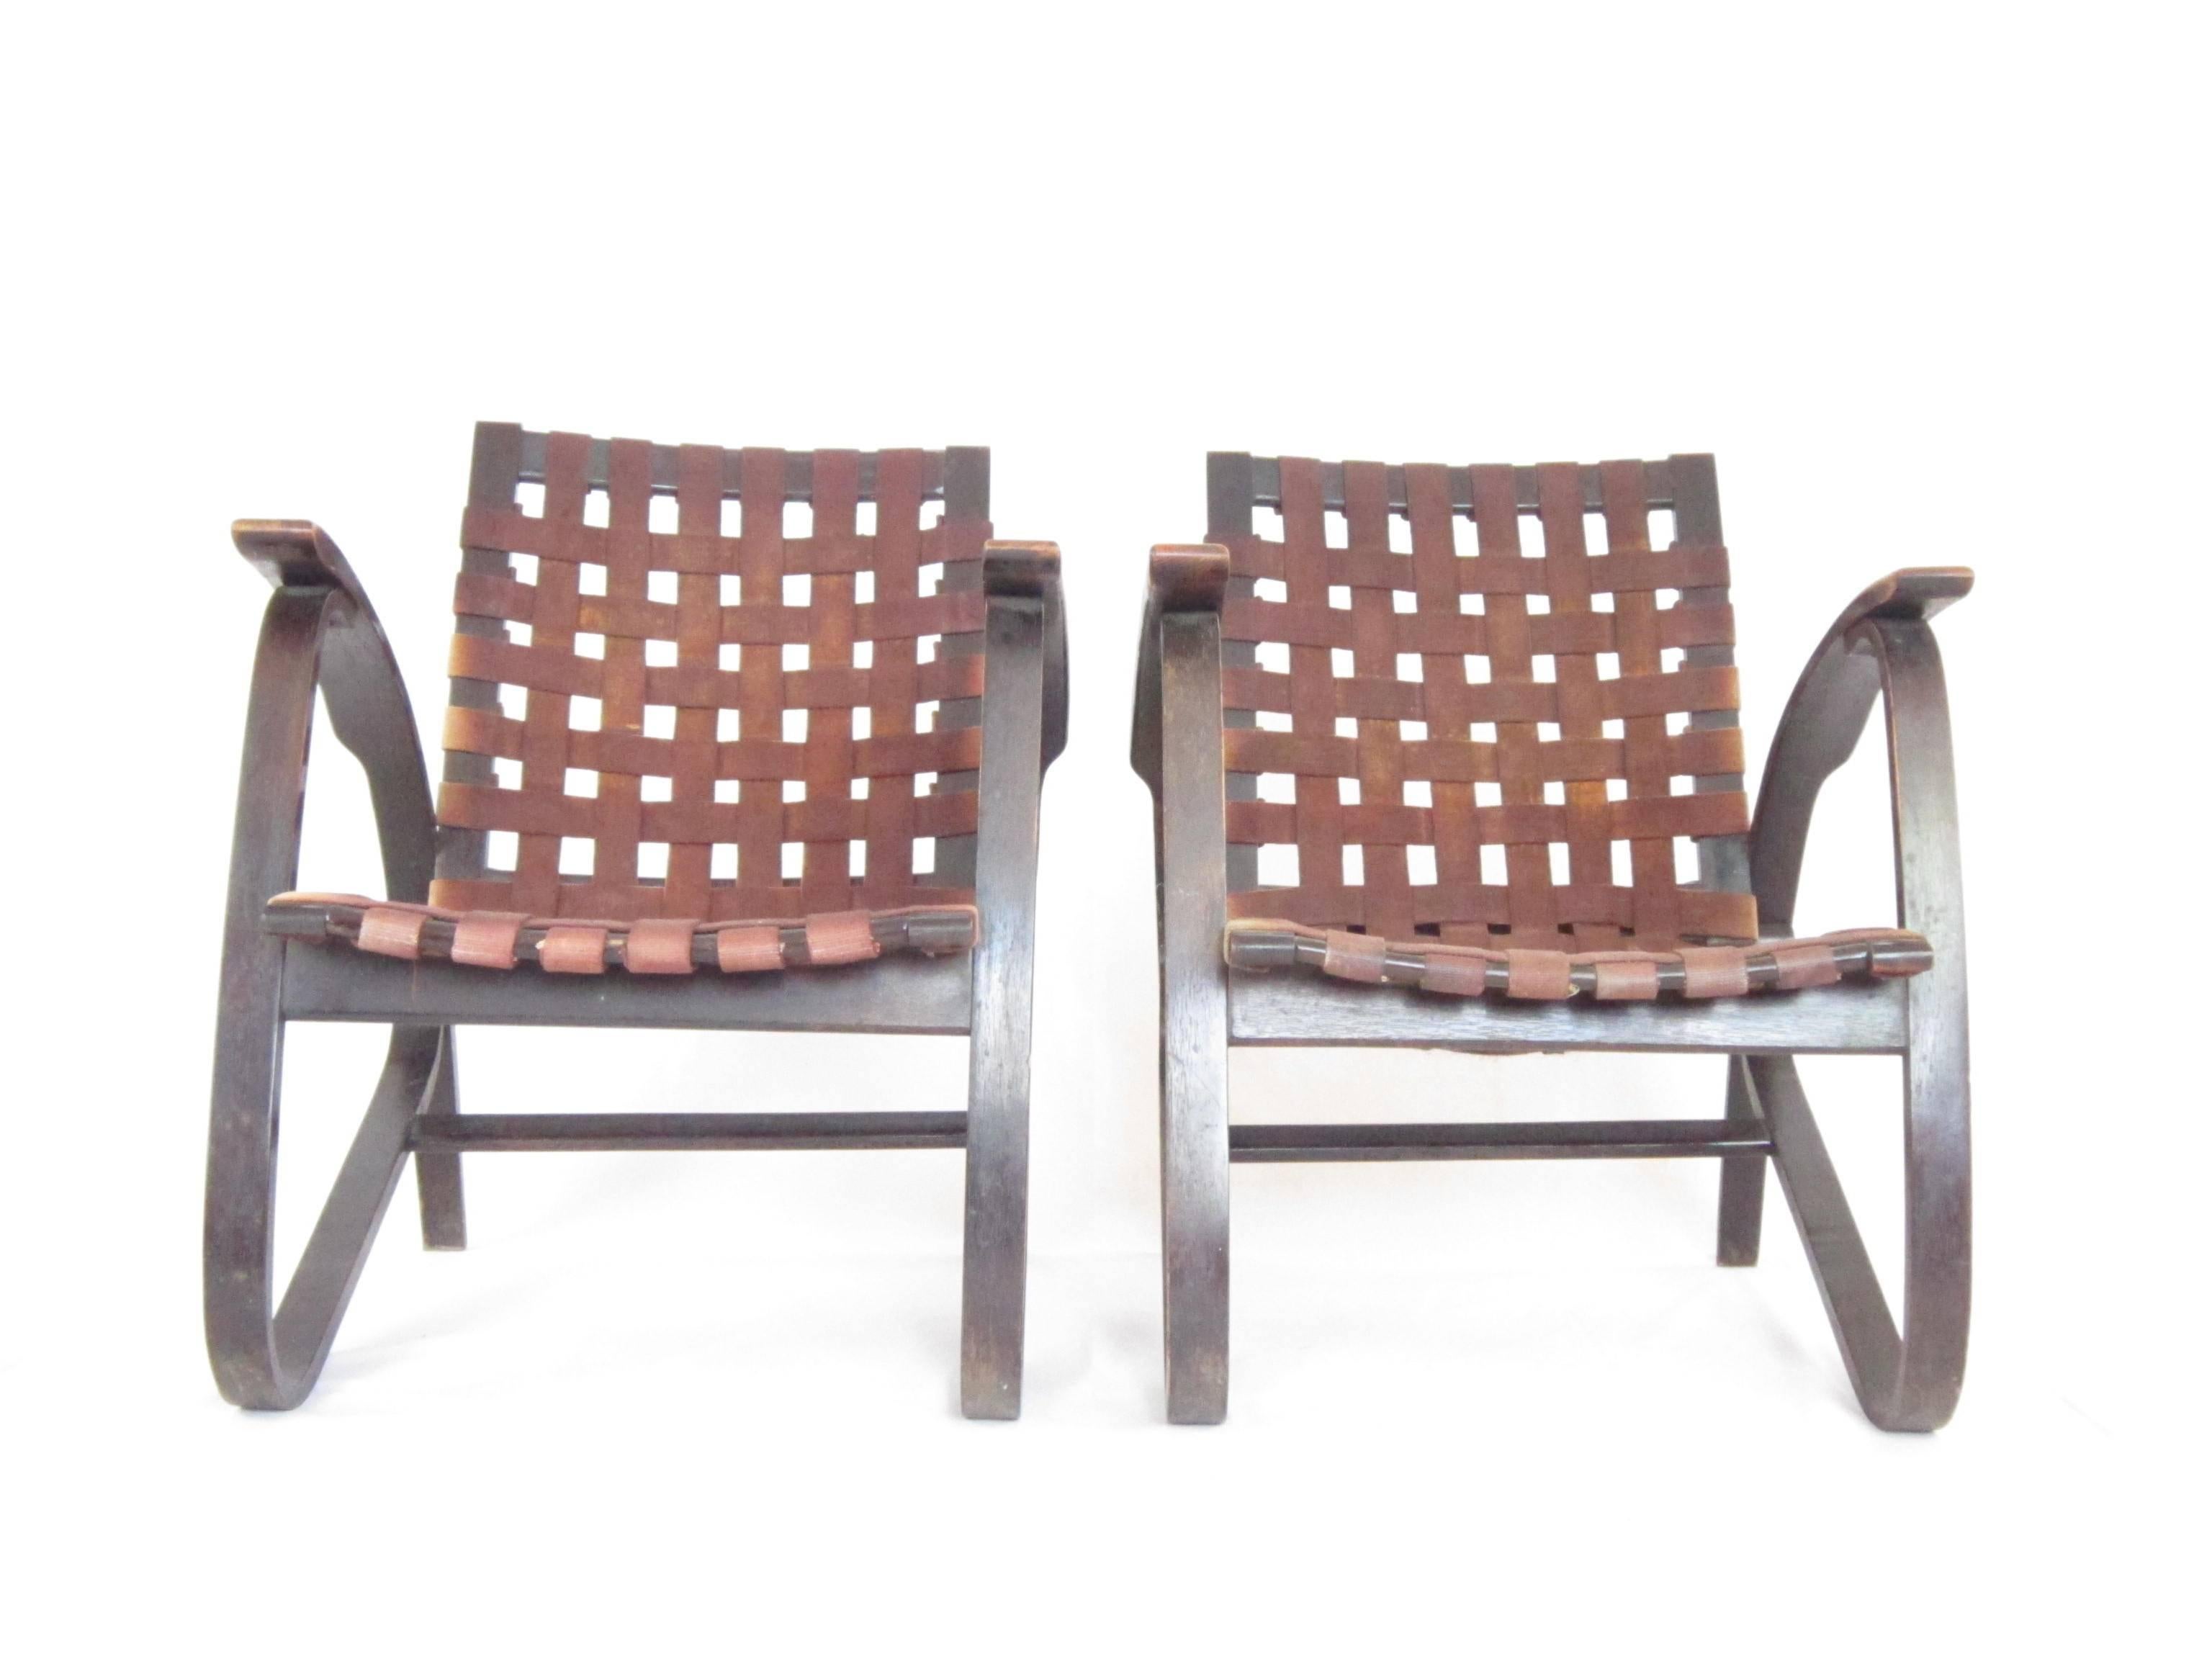 This streamline lounge chair by Czech designer Jan Vanek has beautiful bentwood beech arms and thick canvas straps that have been woven to make the seat and backrest. The strips are in good condition and the chairs are ready to use. The quoted